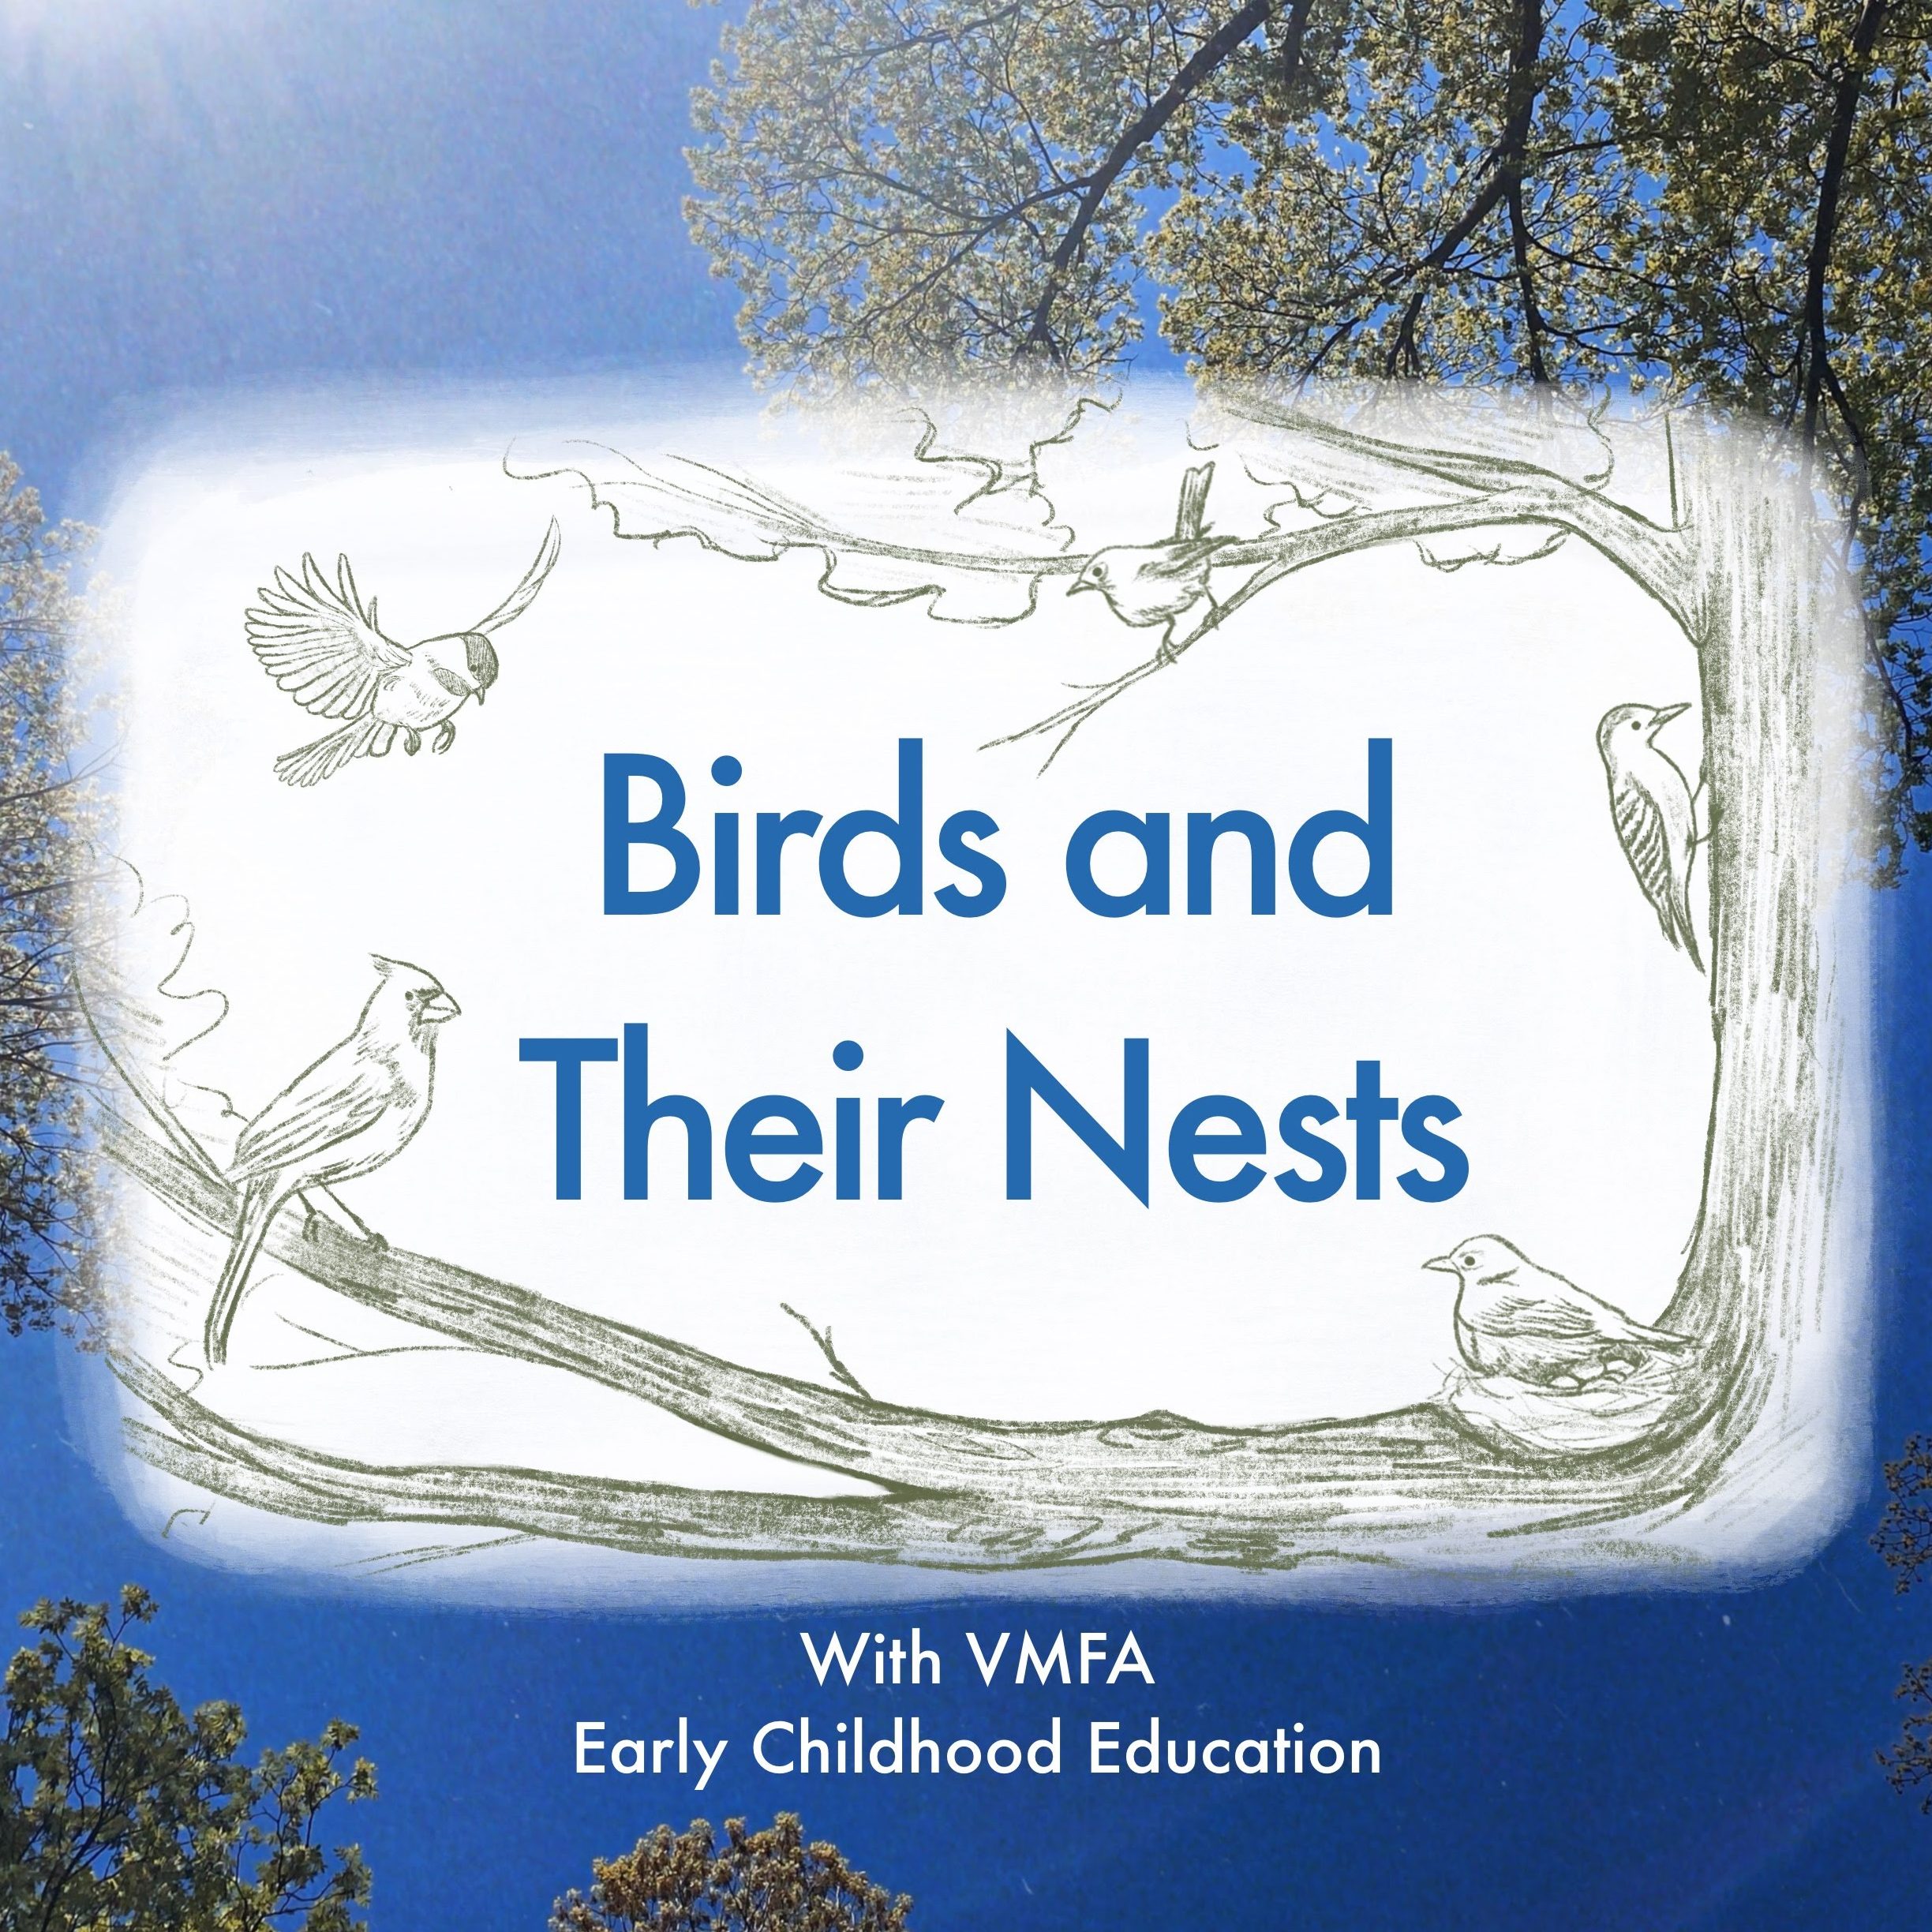 Creative Connection: Birds and Their Nests